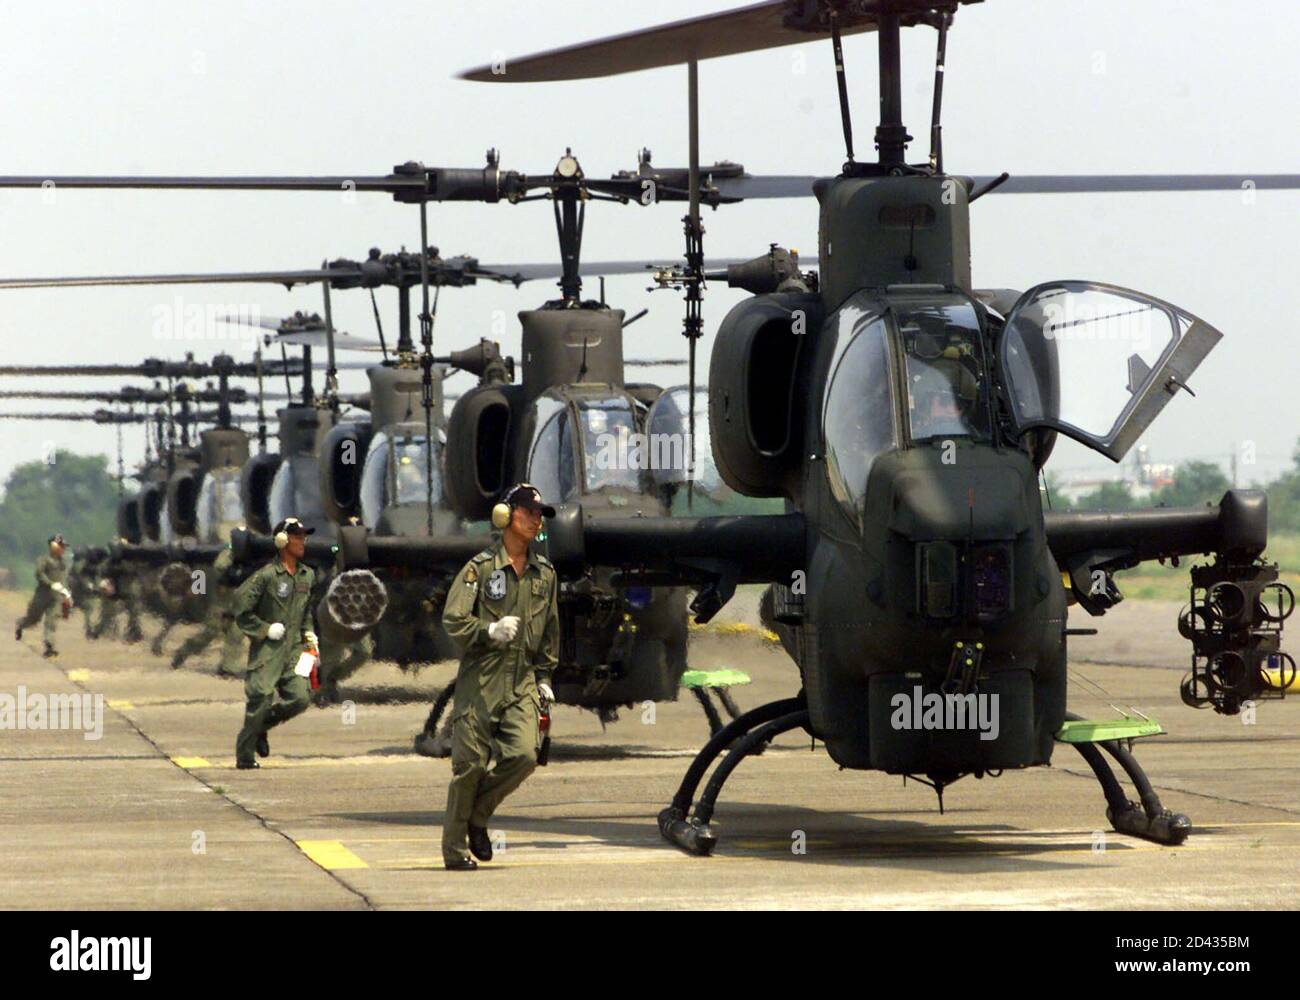 A Taiwan army ground crew run towards U.S.-made AH1W attack helicopters prior to a demonstration of their unit's flying skills at a military base in Taichung August 21, 2001, after being selected as model troops. In an annual contest the military chooses model troops from each branch of the military services.  SK/AH/PB Stock Photo